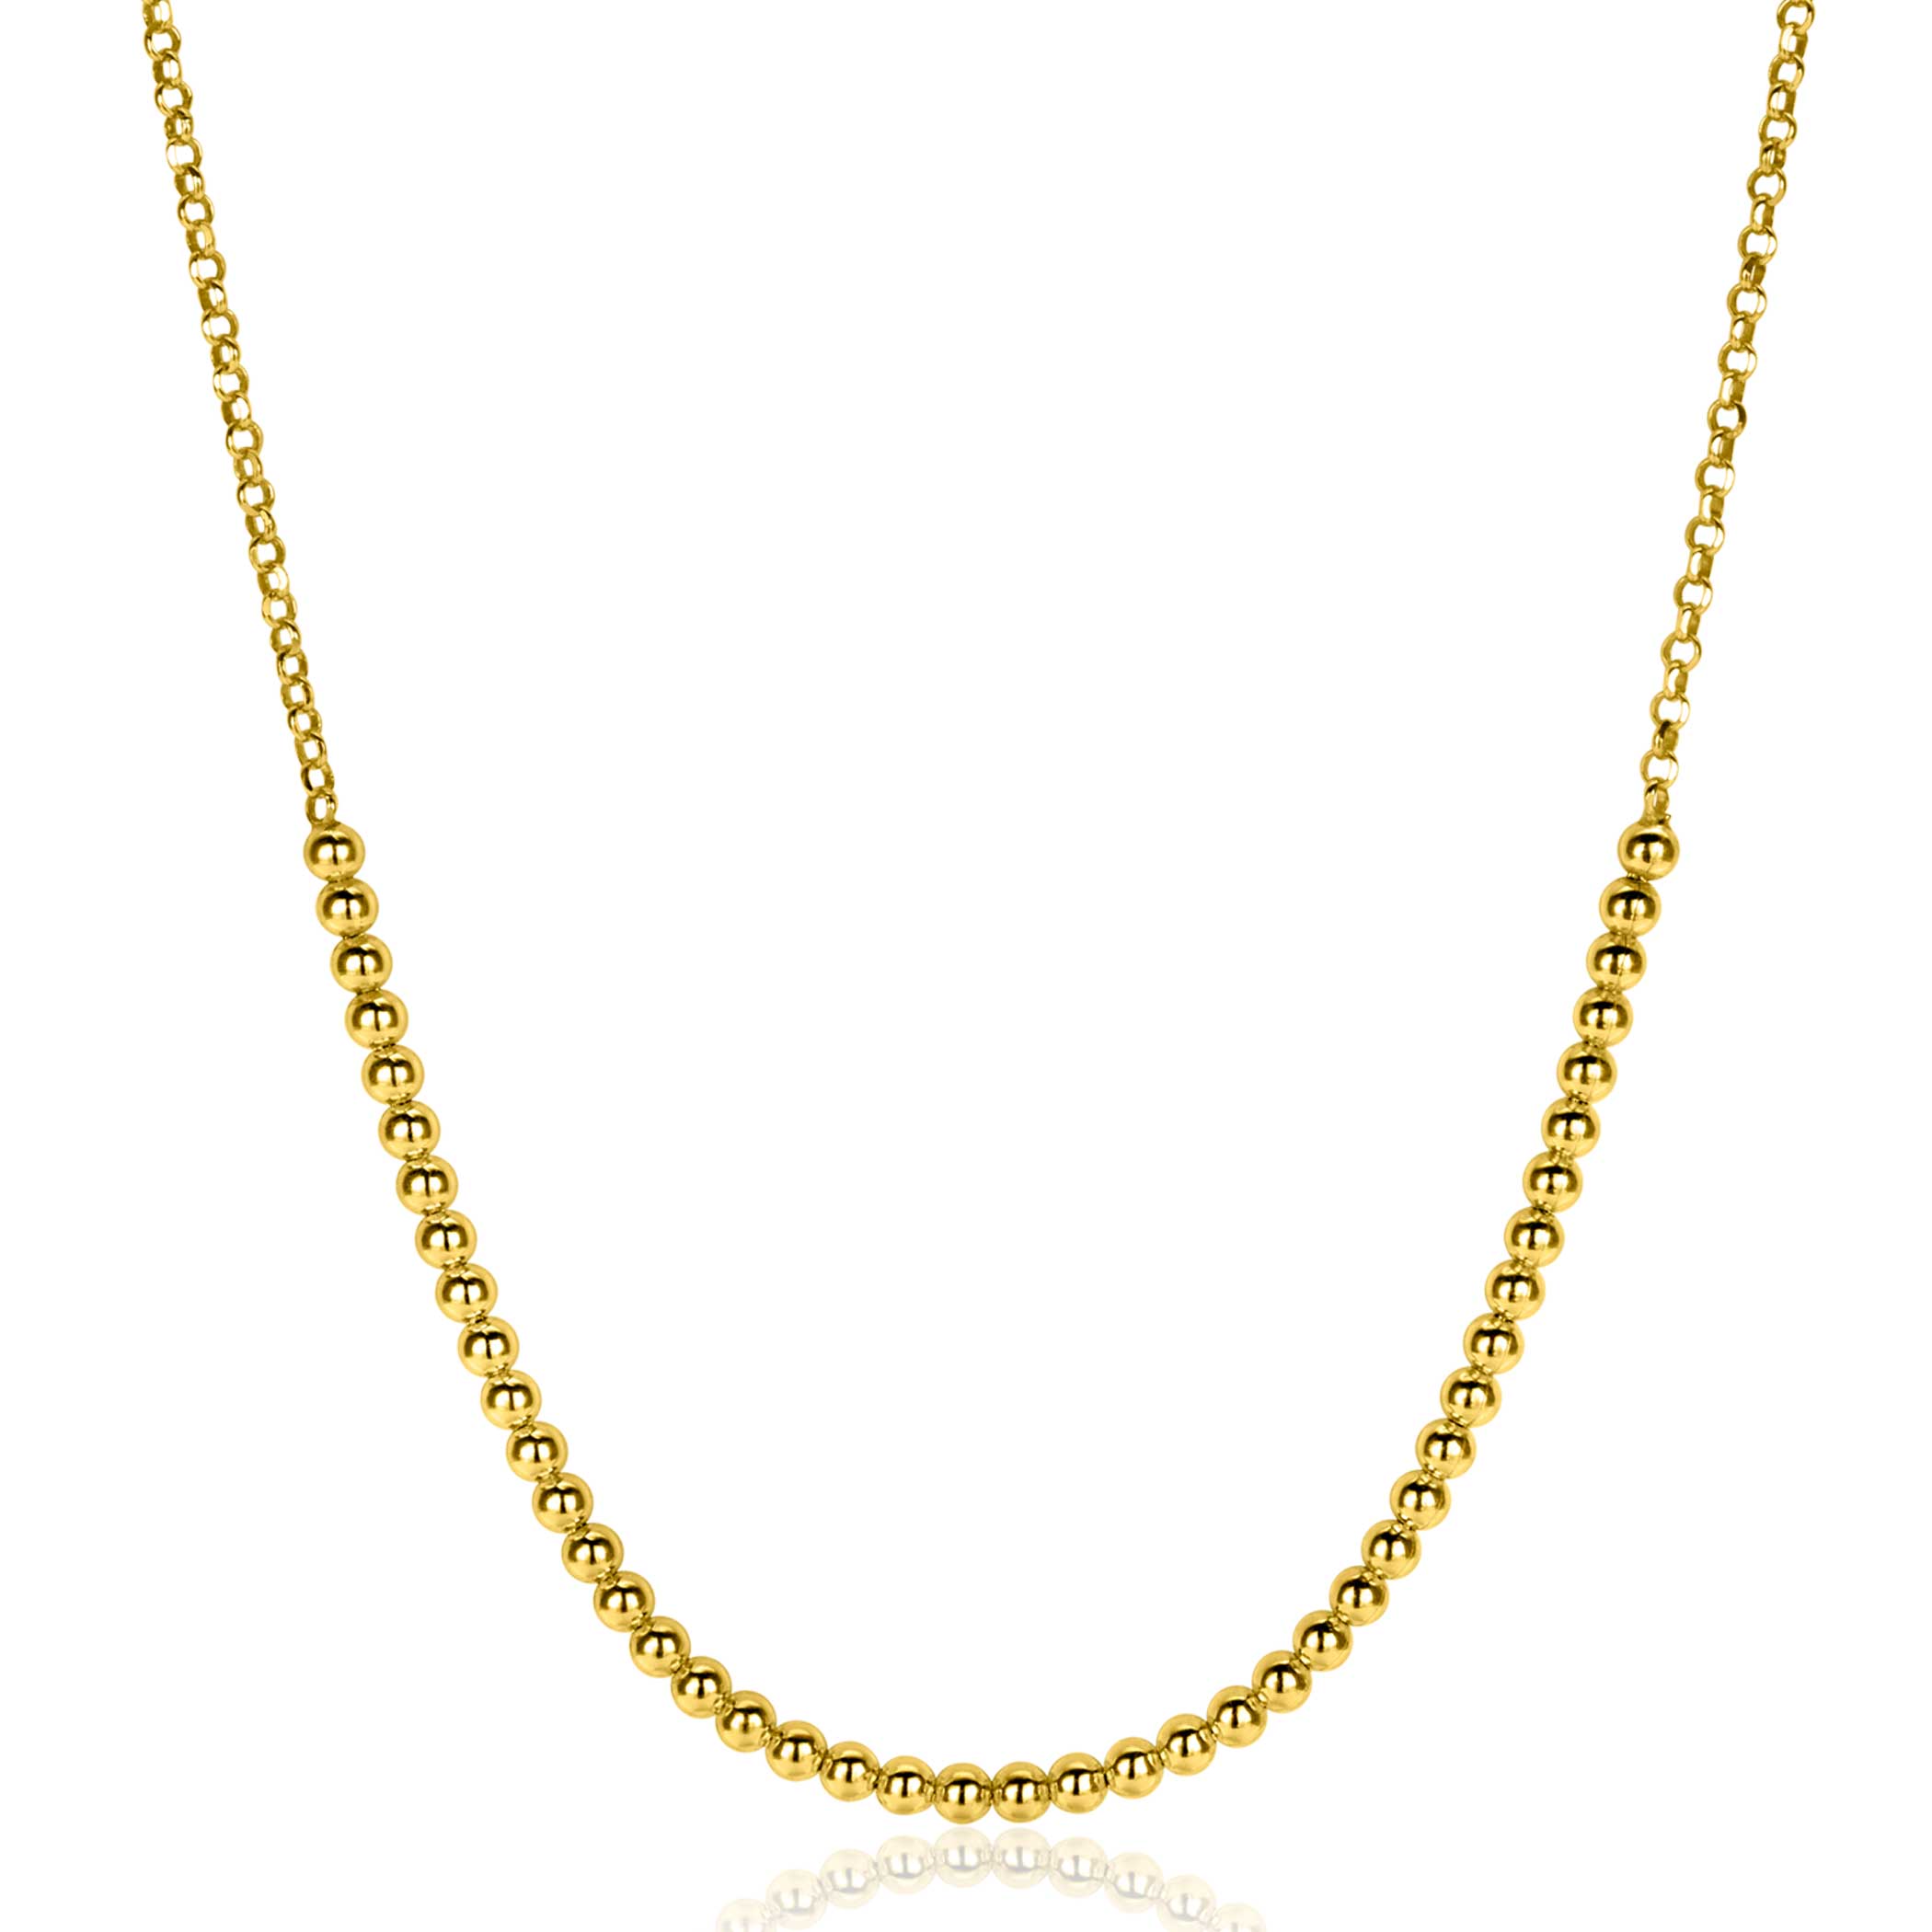 ZINZI gold plated silver jasseron necklace with bead links (2.5mm wide) in the middle 40-45cm ZIC2640G